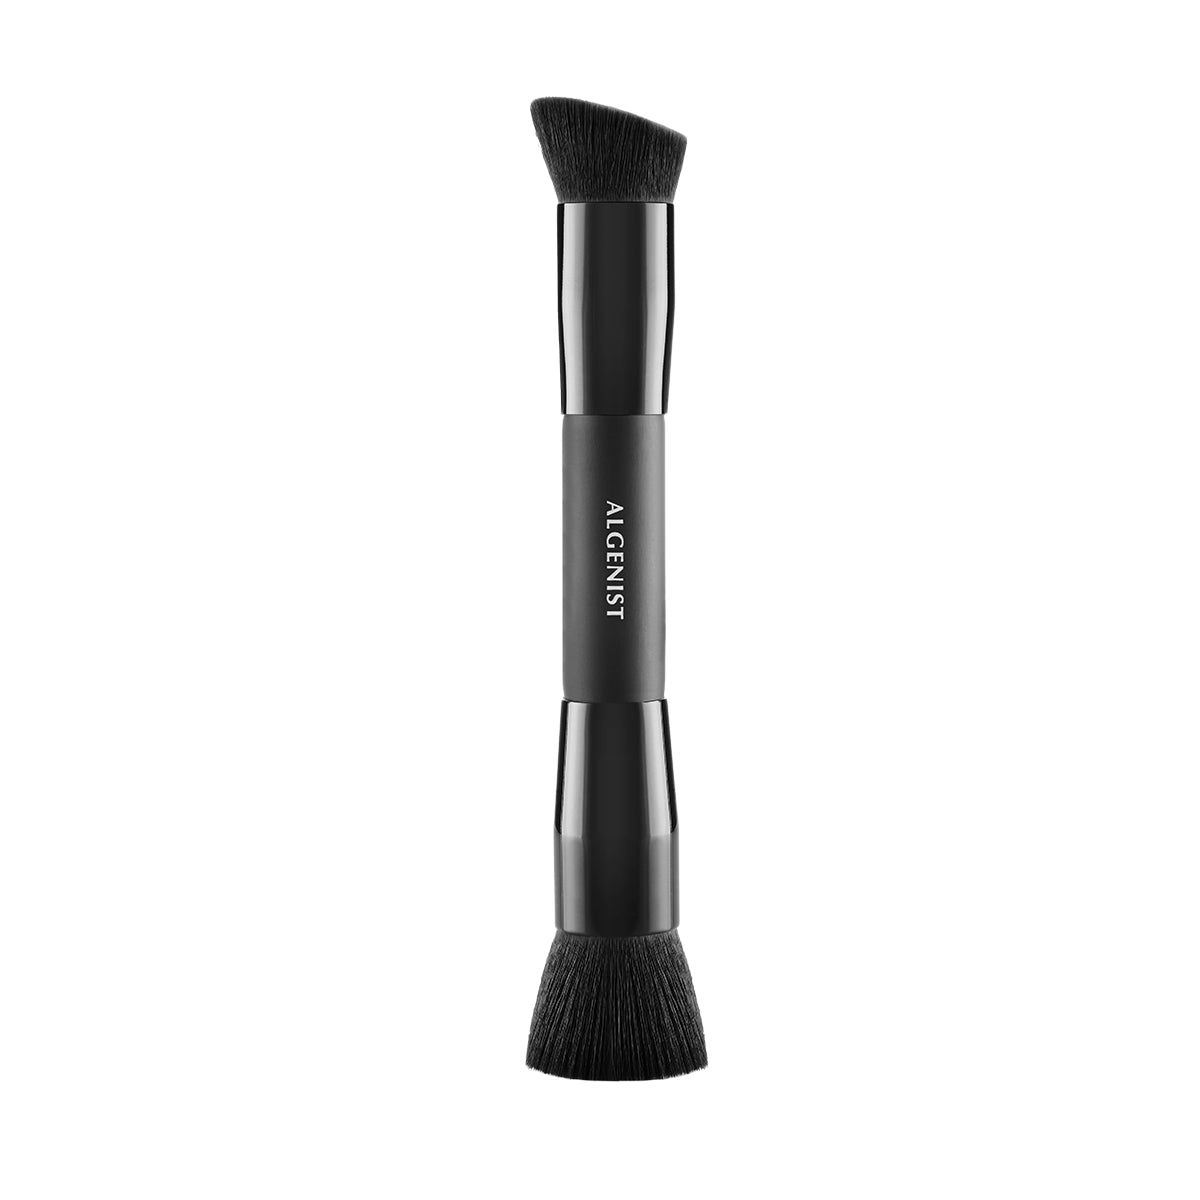 Algenist Dual-Ended Buffing Brush